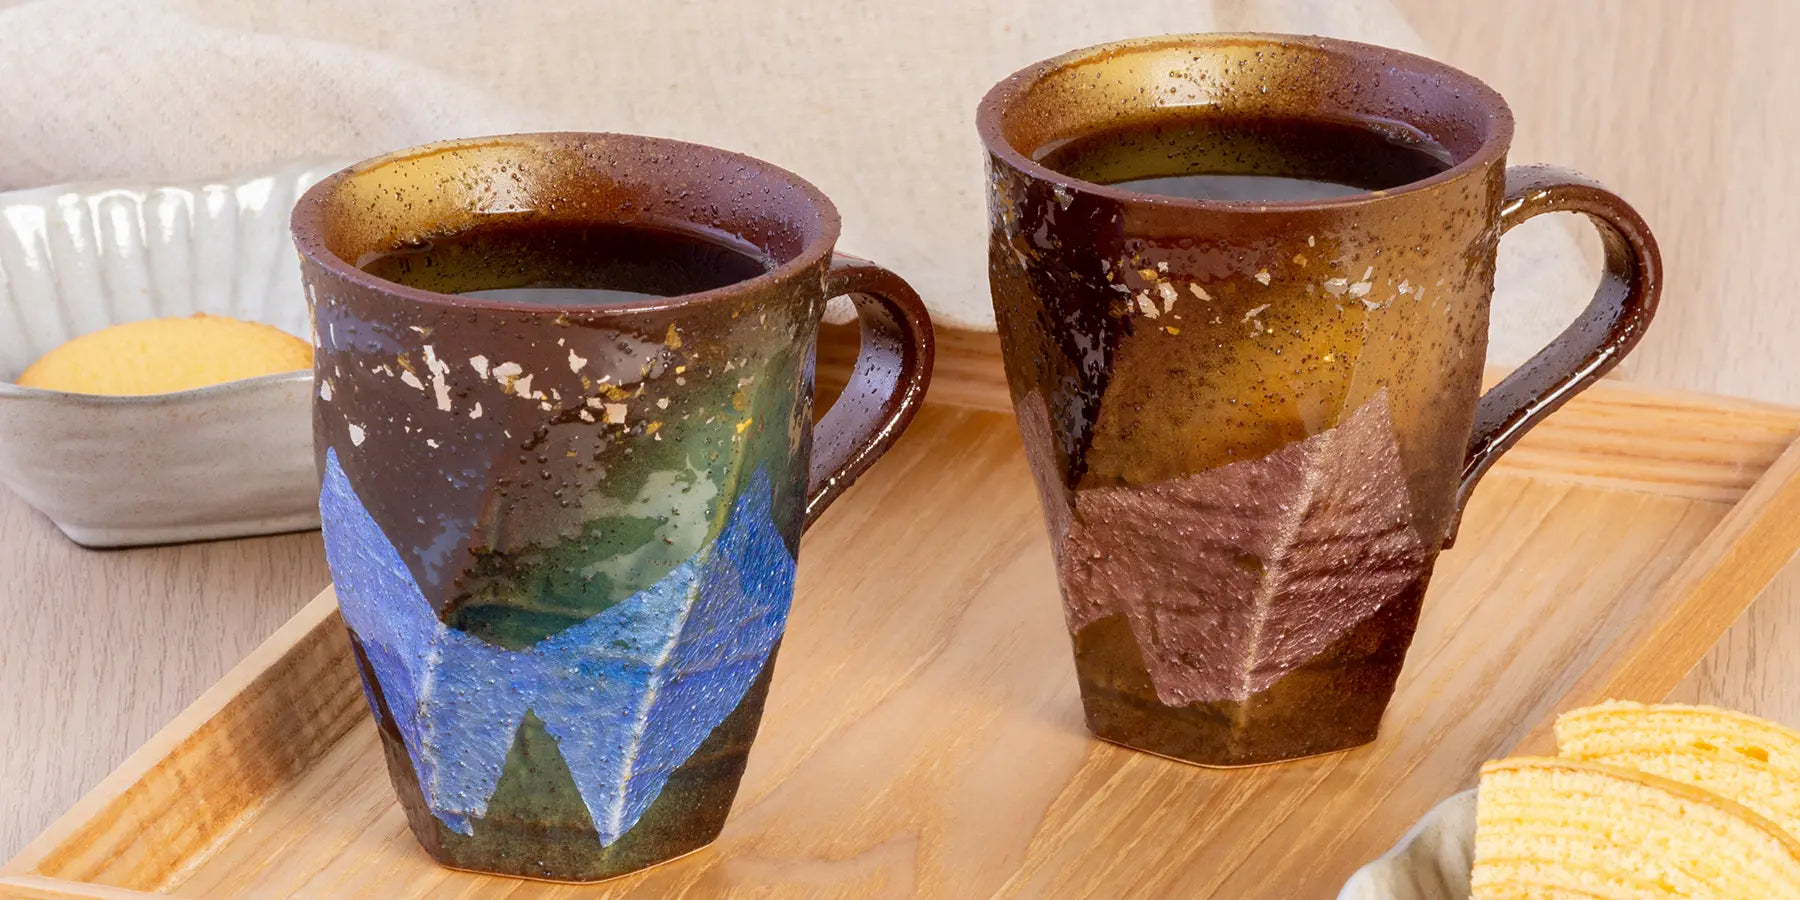 Discover our great selection of Mugs at Globalkitchen Japan.